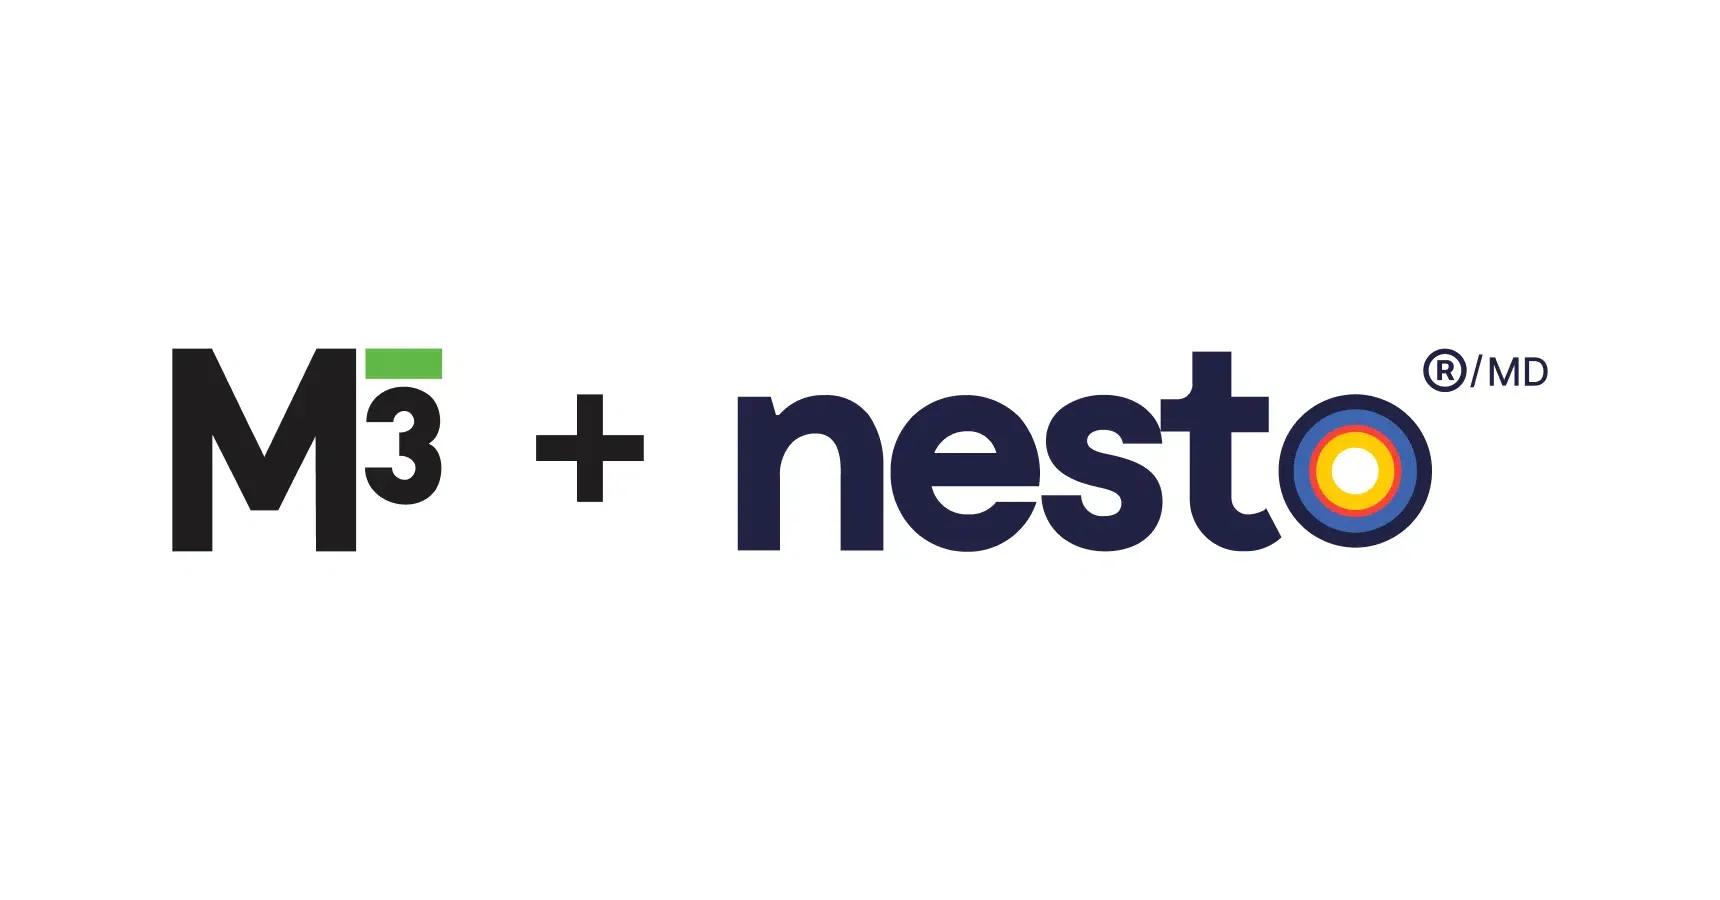 8,500 Brokers Can Soon Serve Up nesto Mortgages Thanks to M3 Deal